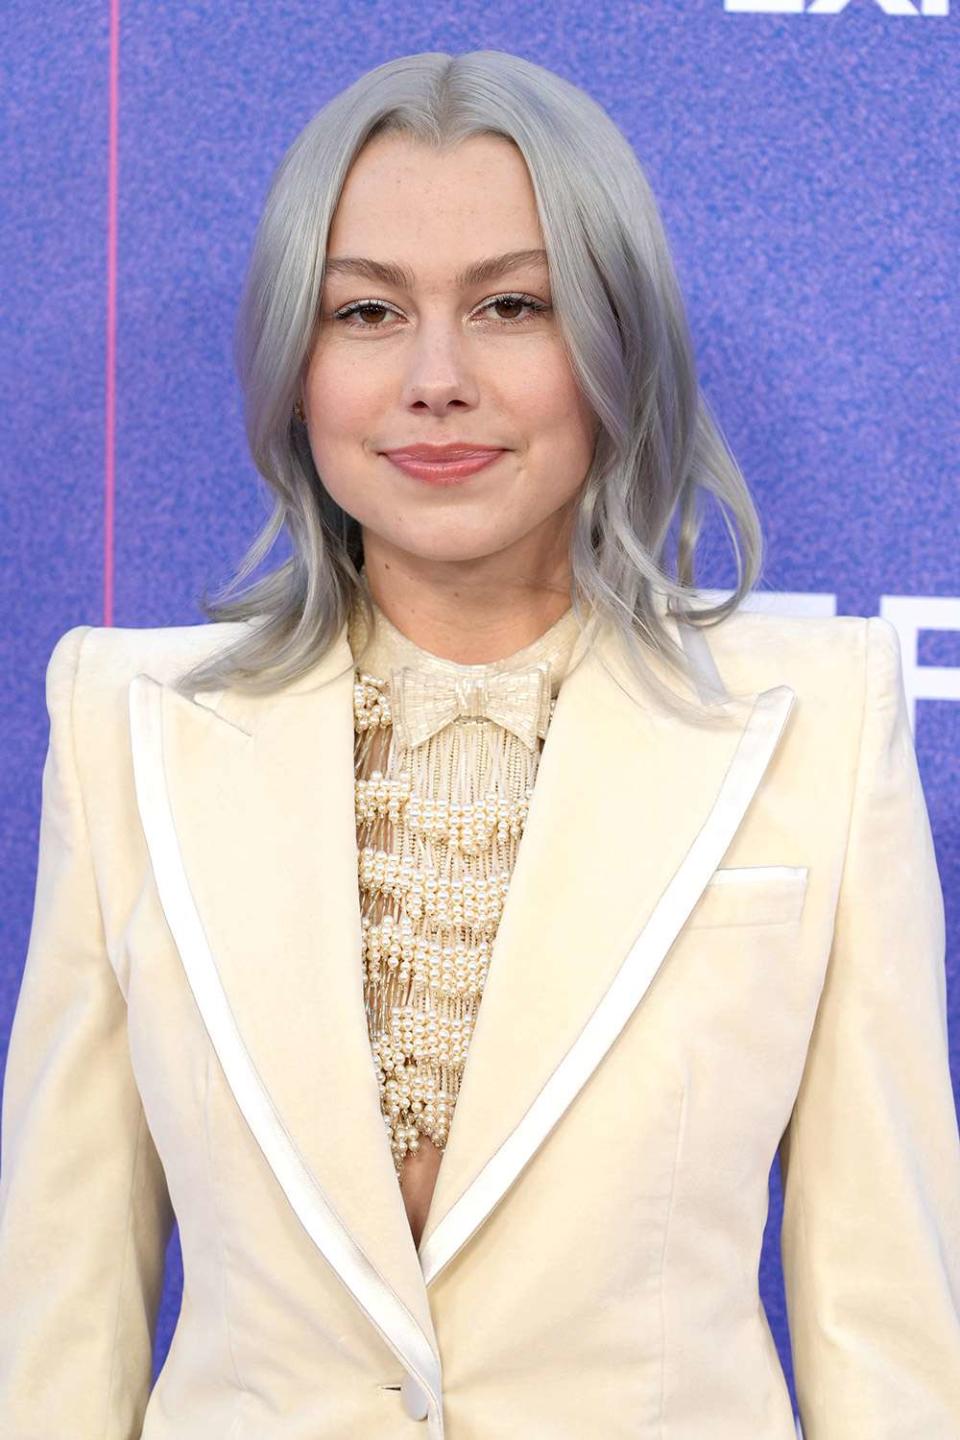 INGLEWOOD, CALIFORNIA - MARCH 02: Phoebe Bridgers attends Billboard Women in Music at YouTube Theater on March 02, 2022 in Inglewood, California. (Photo by Kevin Mazur/WireImage)